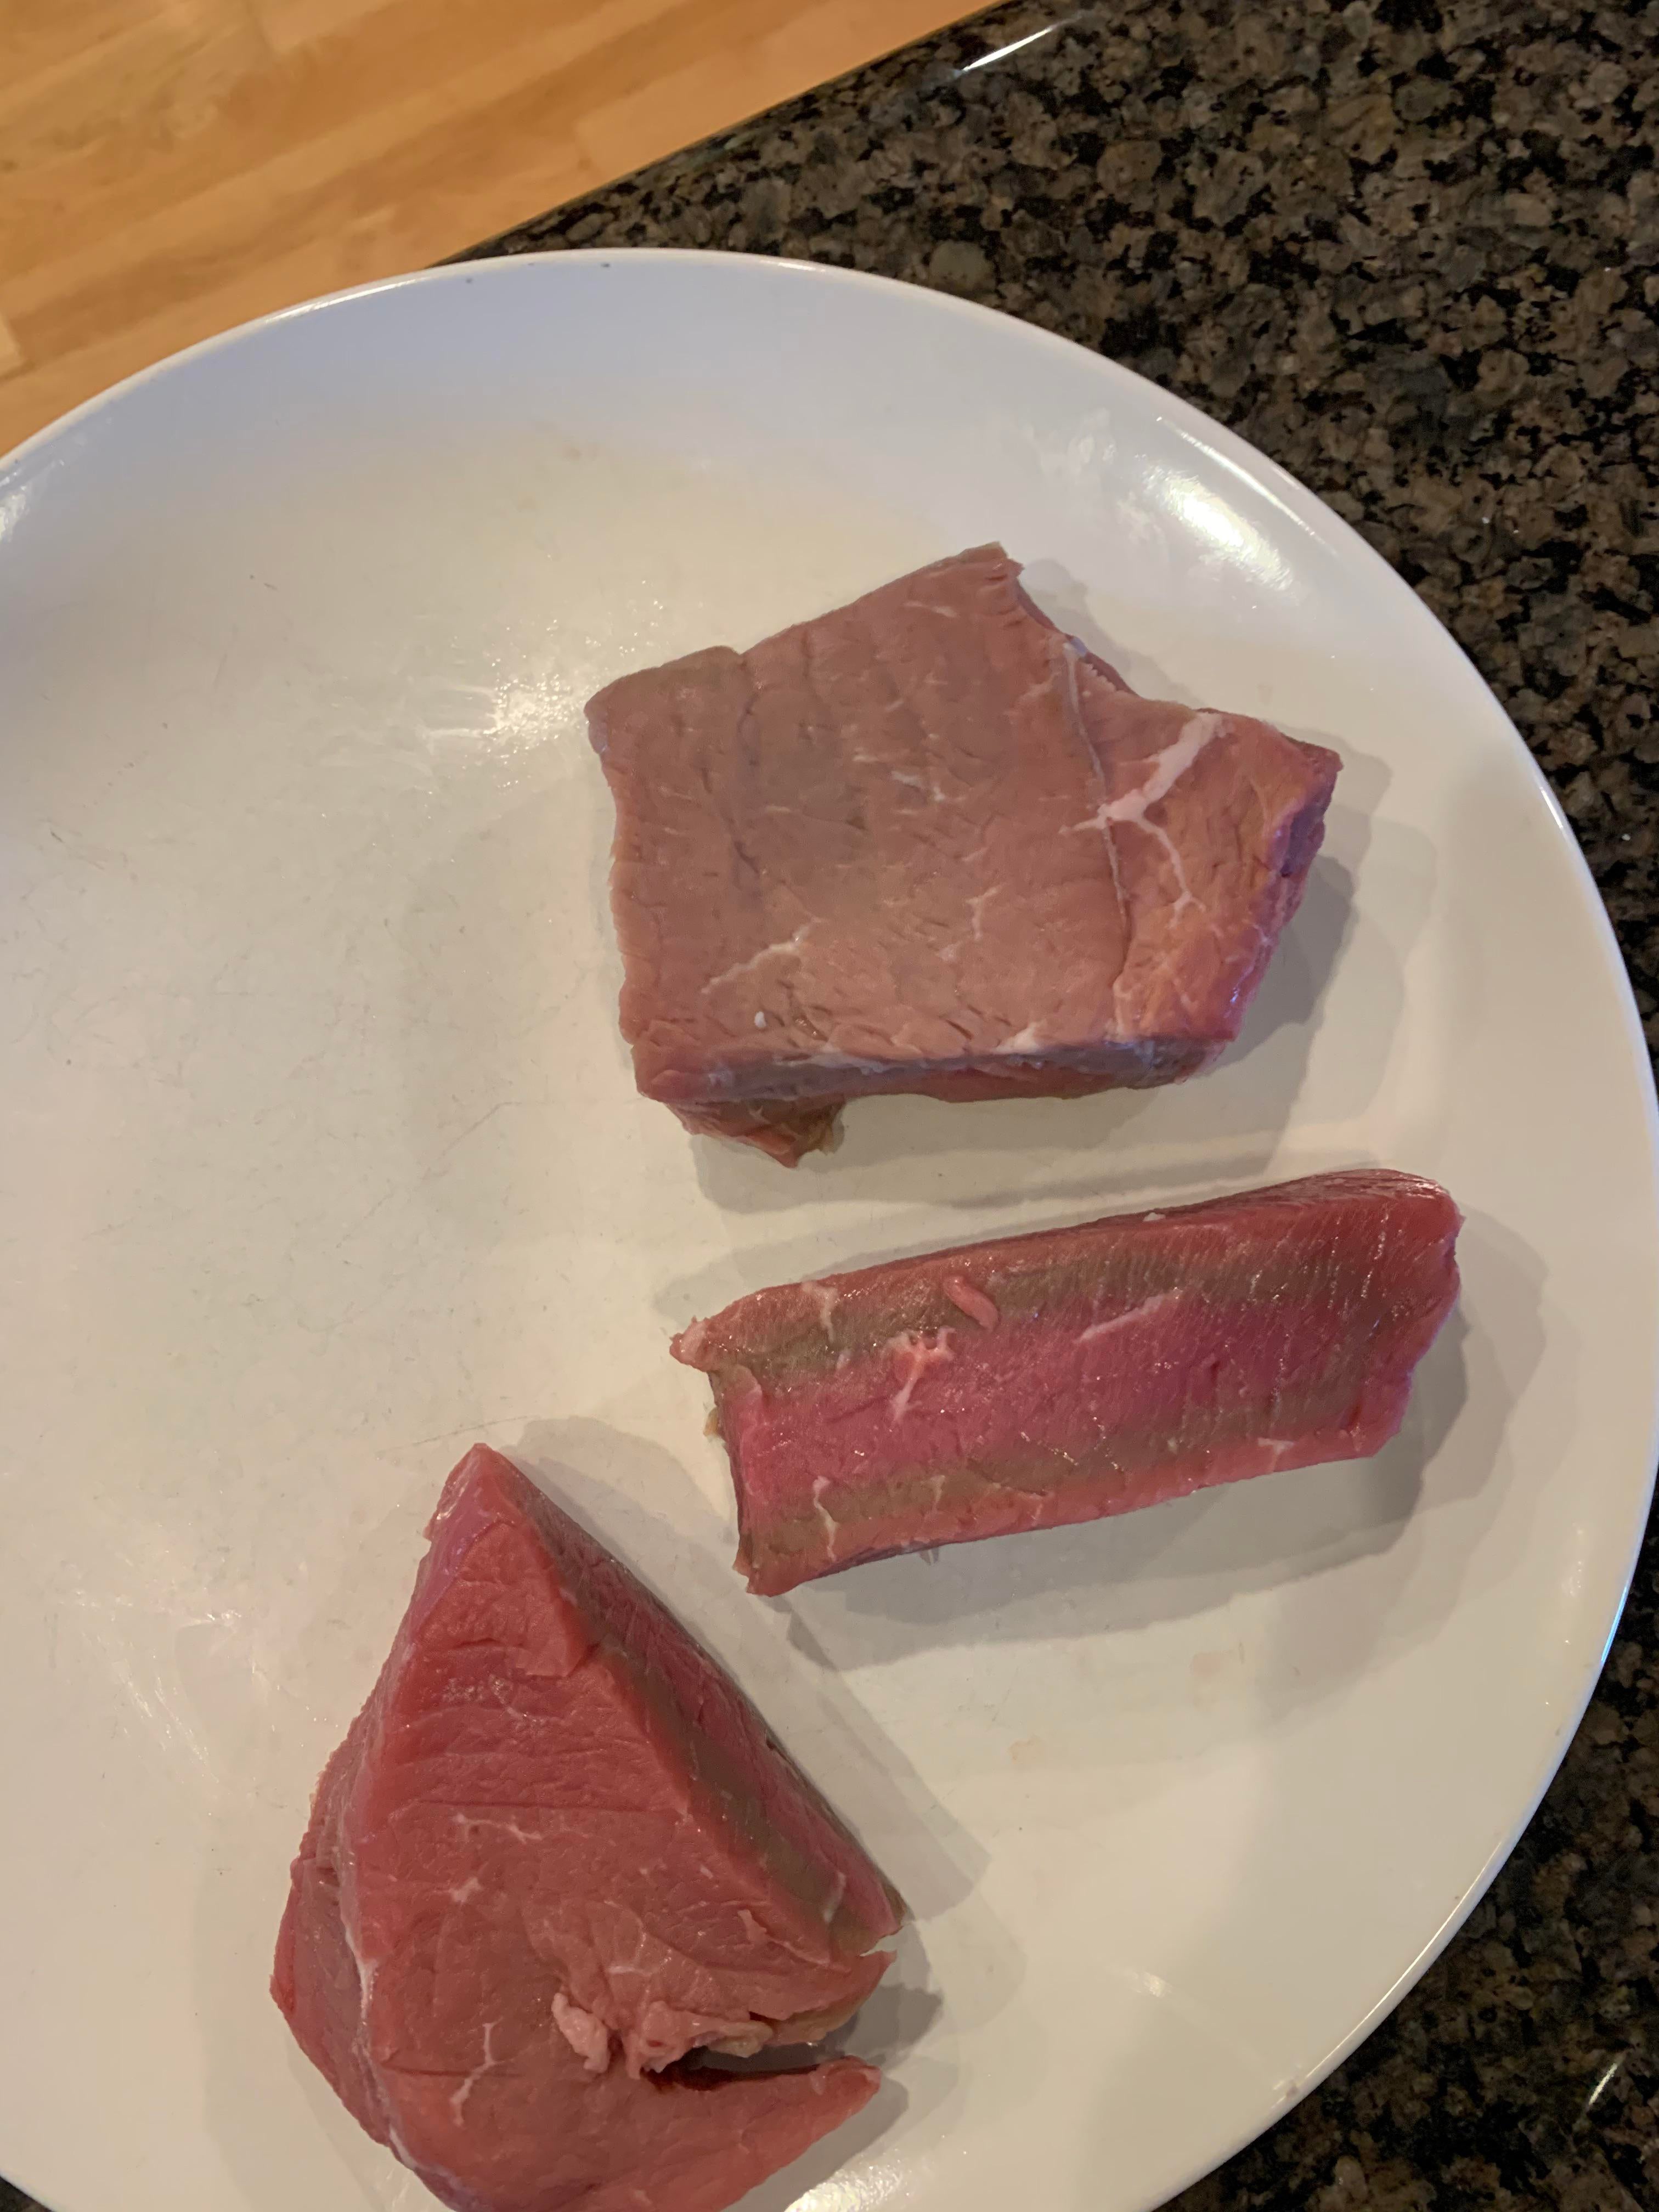 Is this safe to eat? Raw steak has turned grey. 2 days after the sell